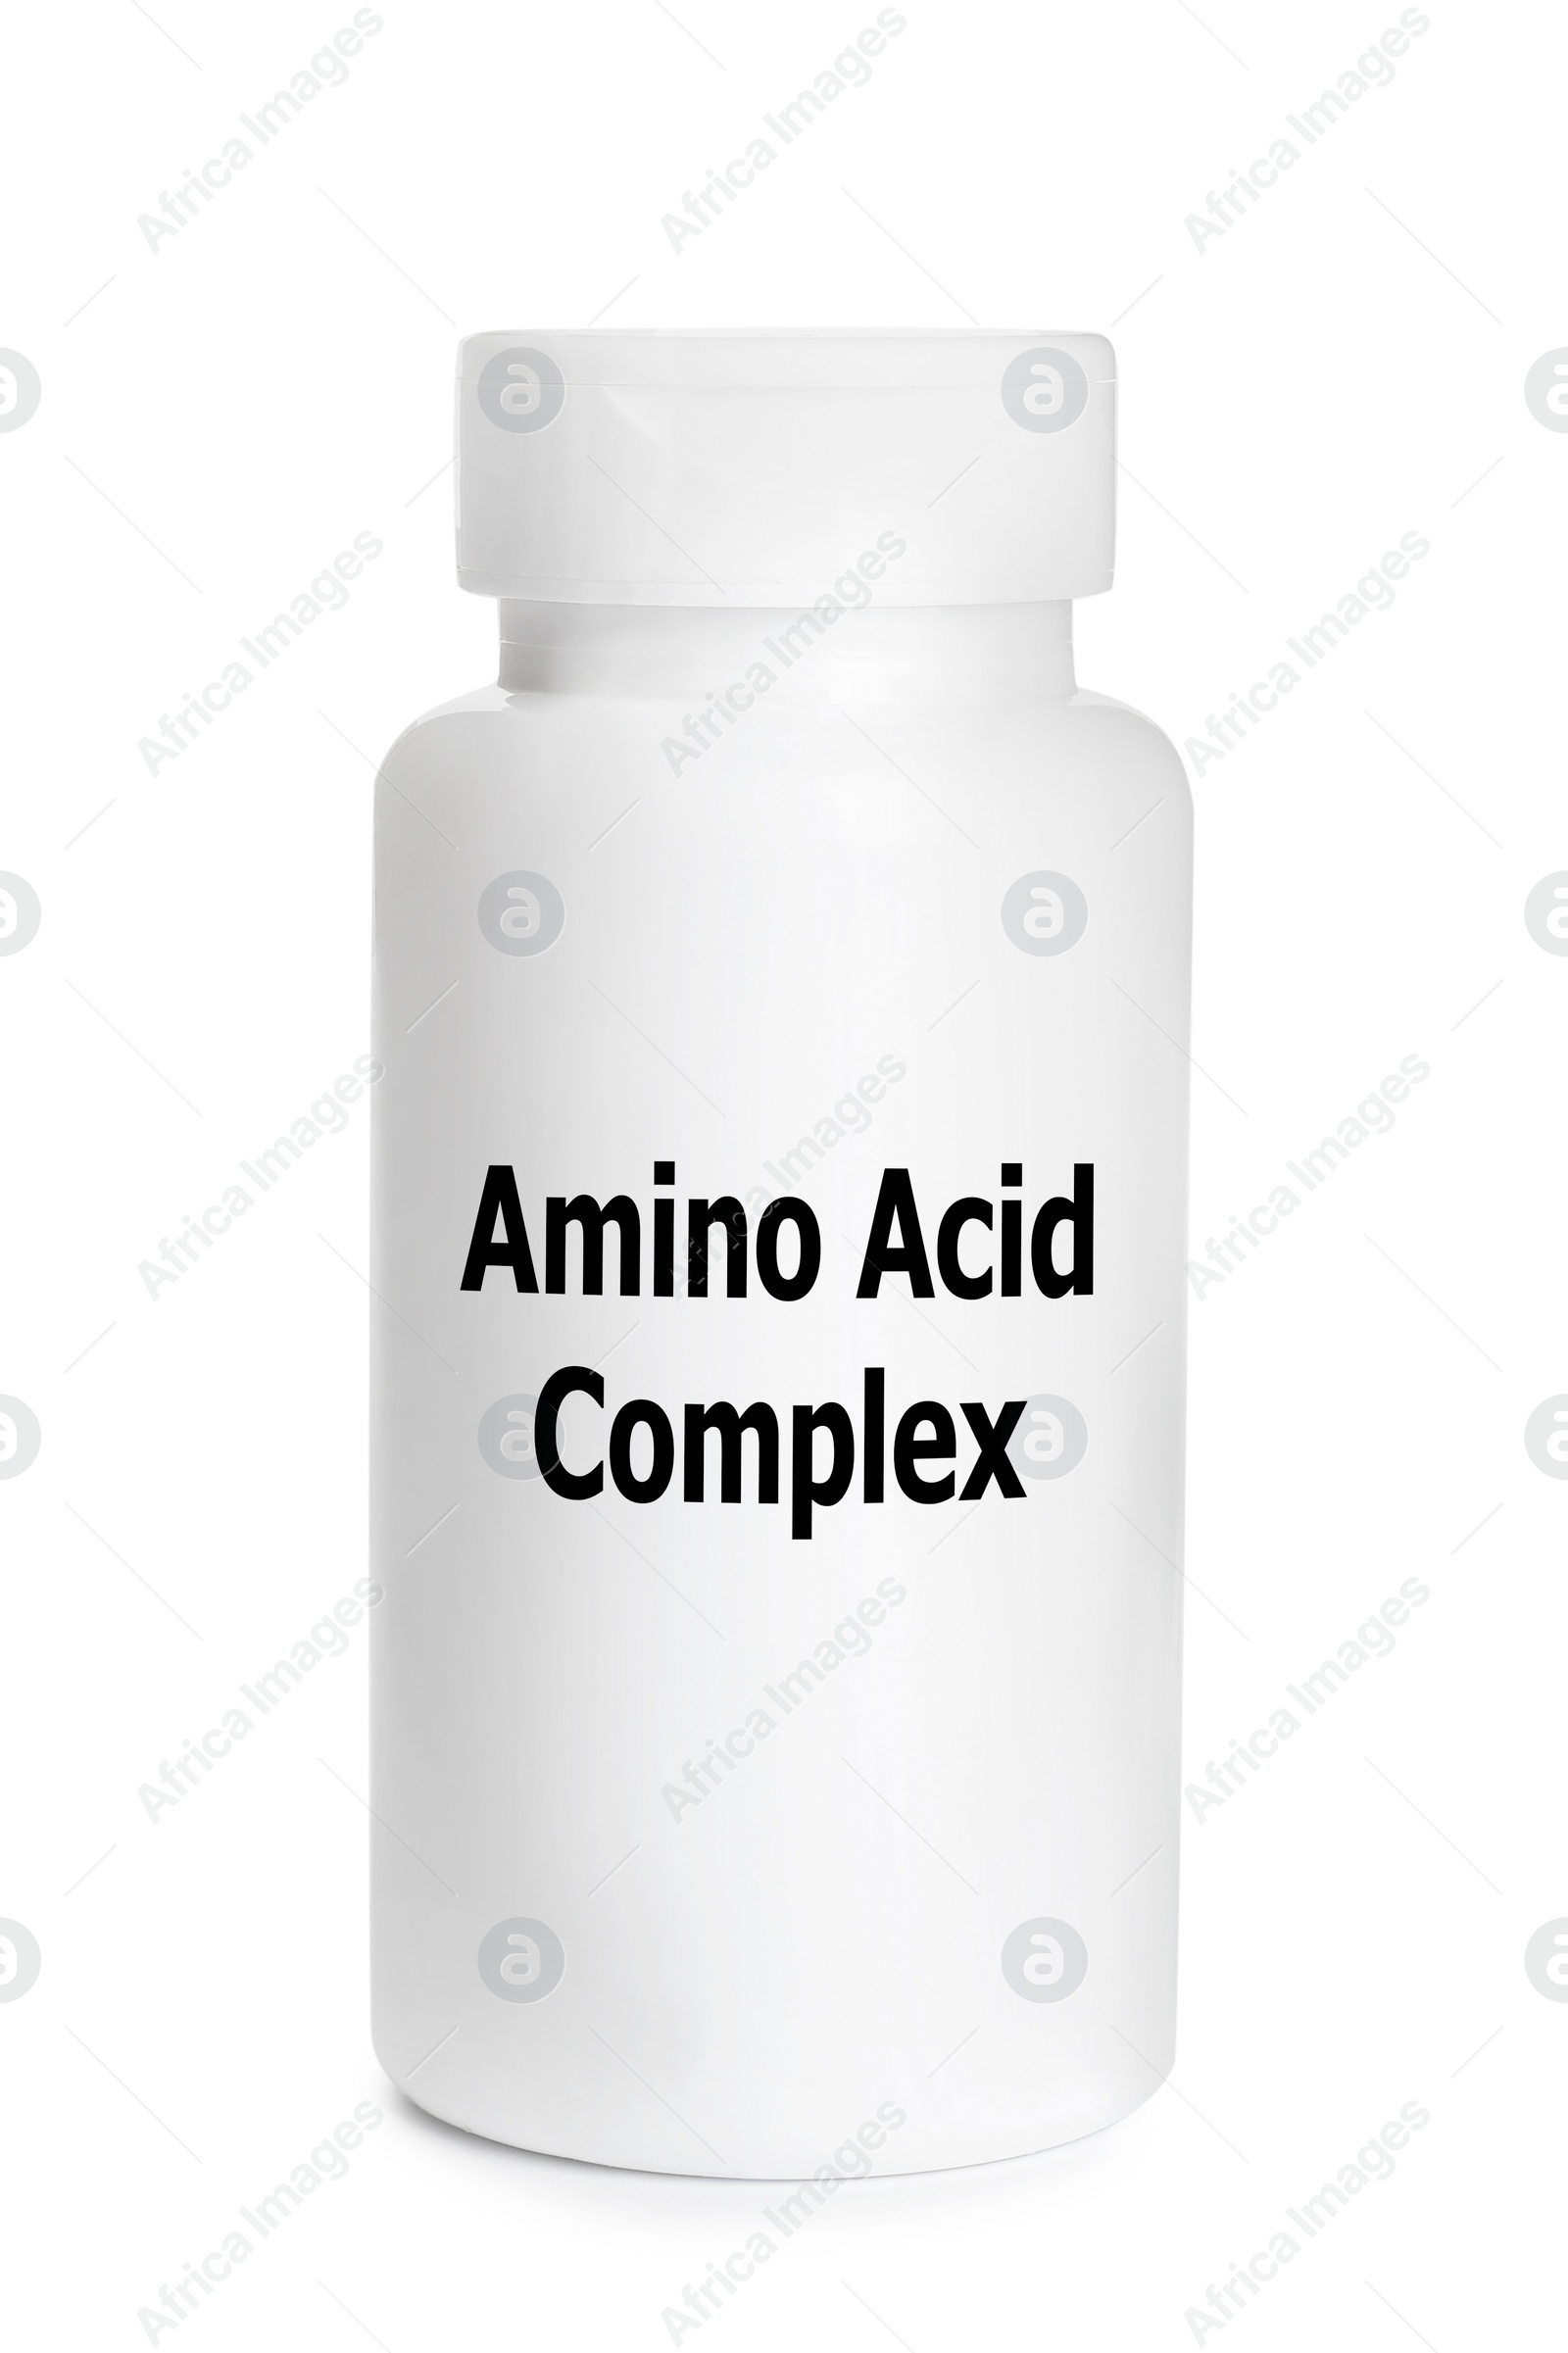 Image of Plastic bottle with Amino Acid Complex on white background